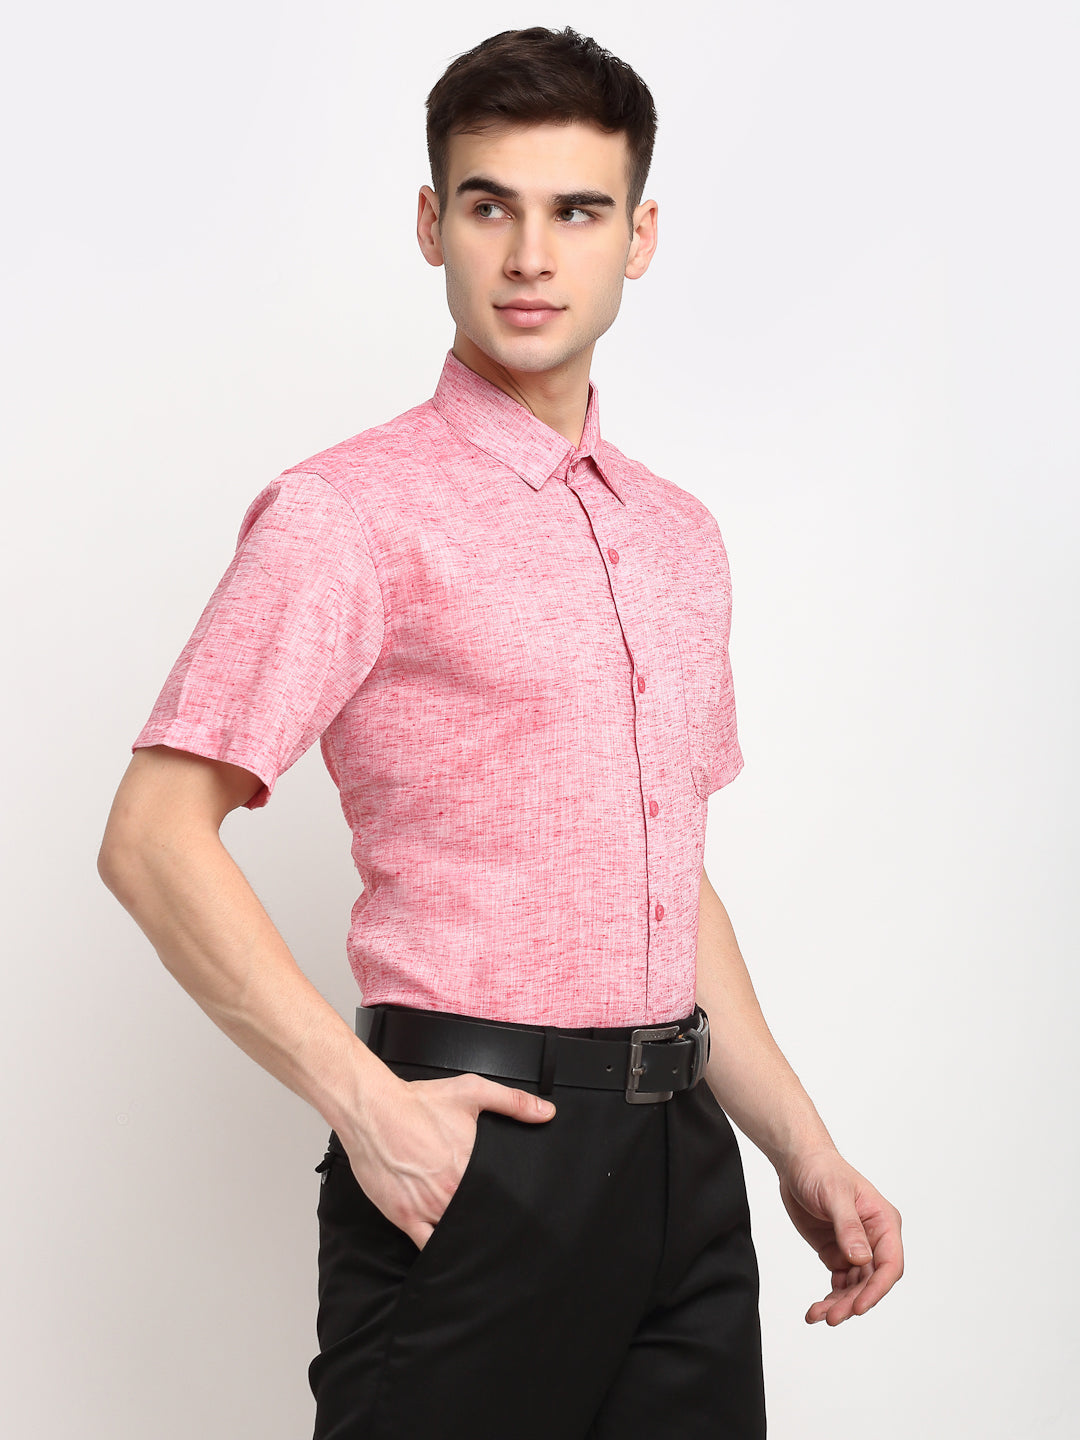 Men's Red Solid Cotton Half Sleeves Formal Shirt ( SF 783Red ) - Jainish